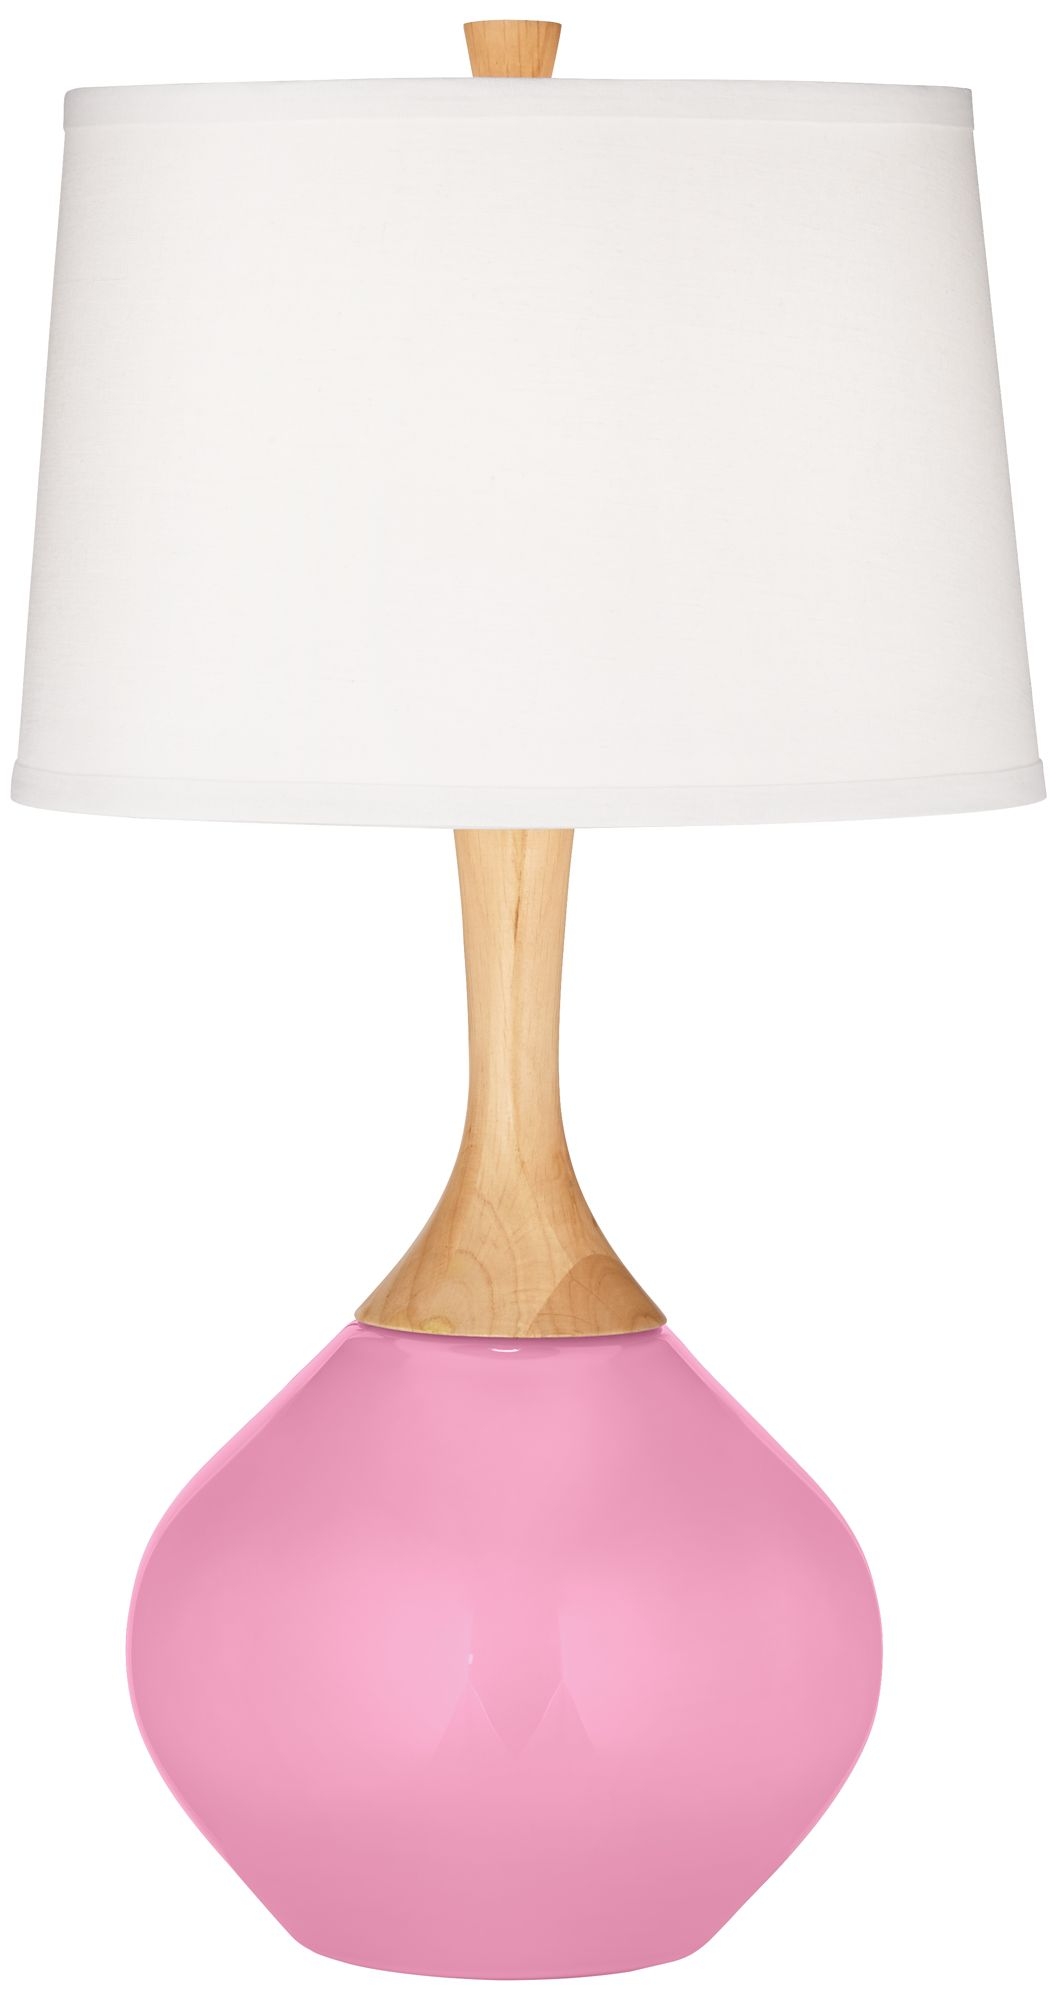 Pale Pink Wexler Table Lamp - Image 0